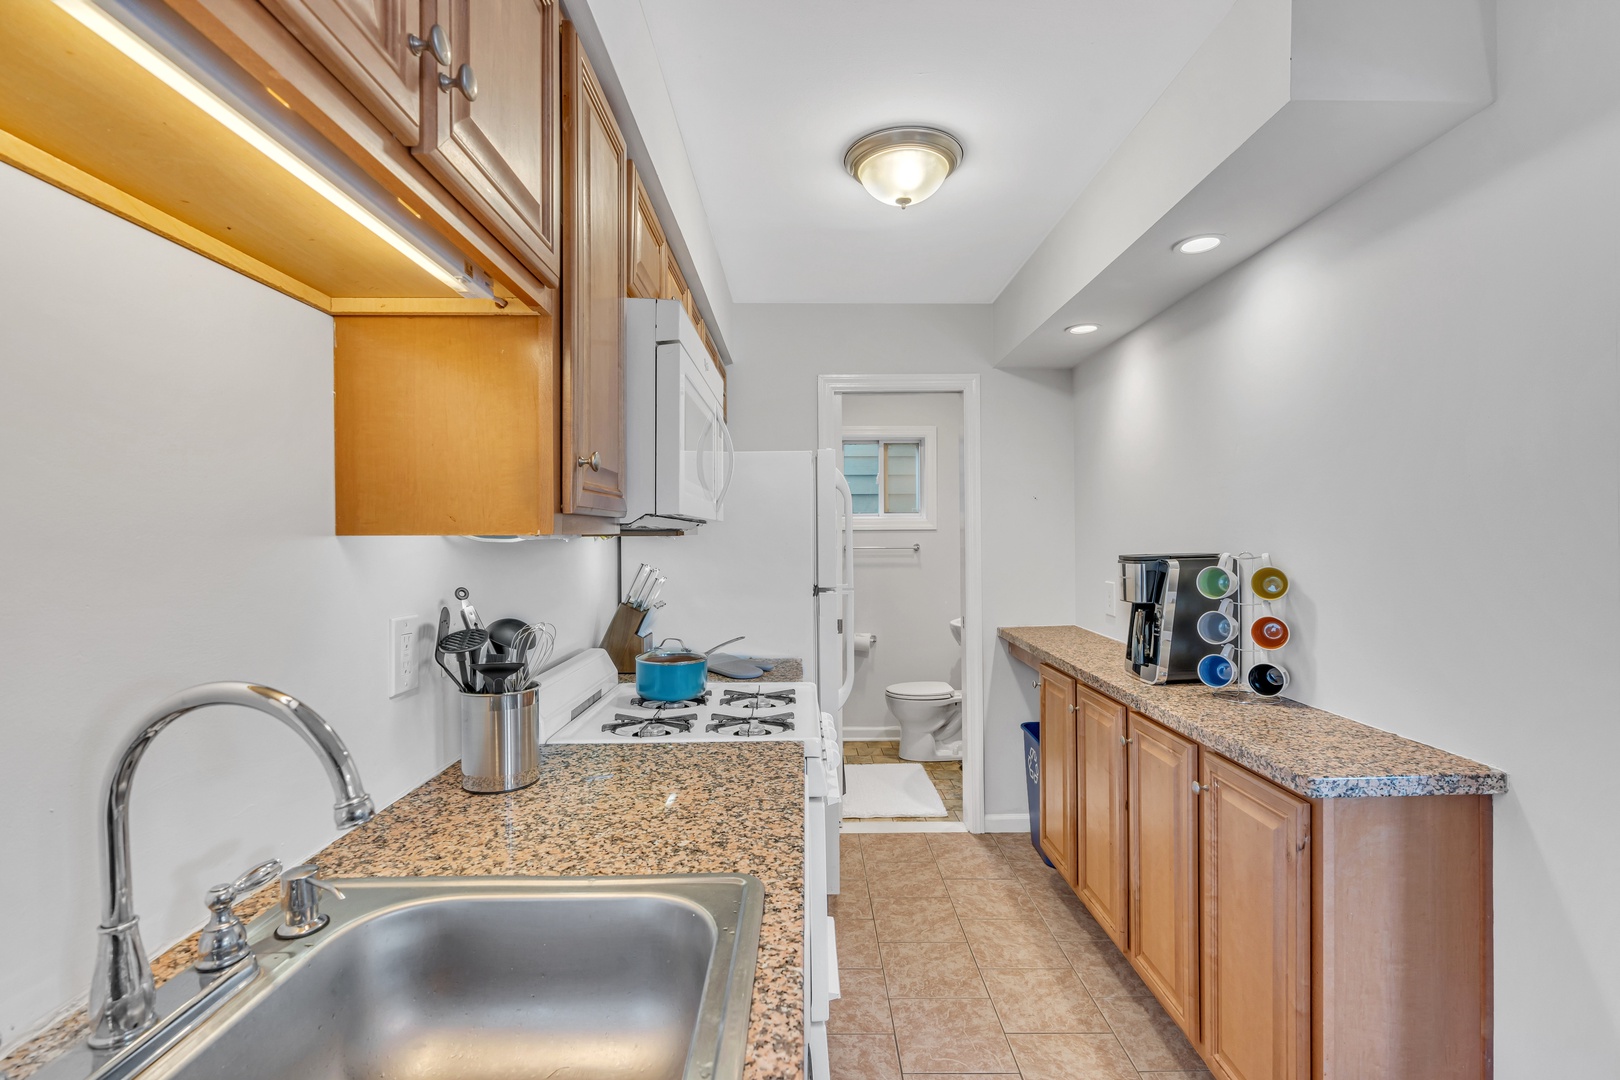 The airy eat-in kitchen offers ample space & all the comforts of home